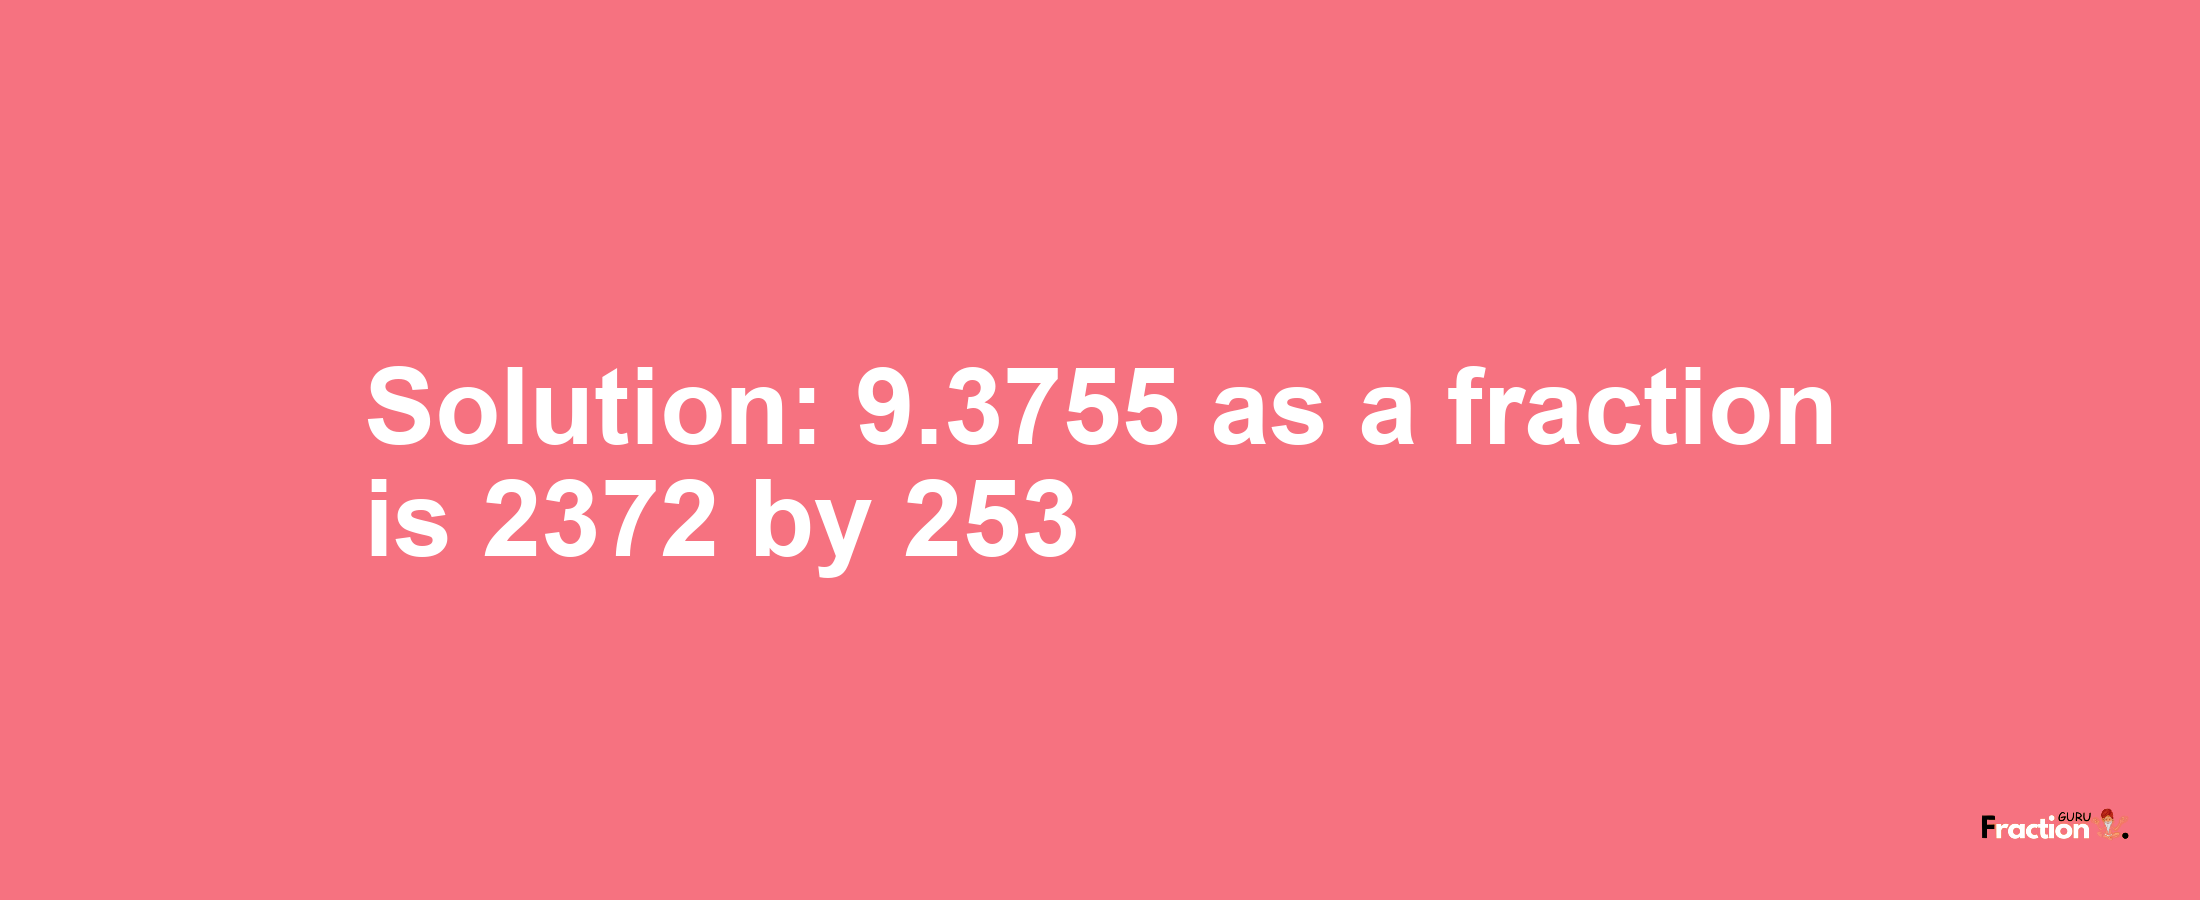 Solution:9.3755 as a fraction is 2372/253